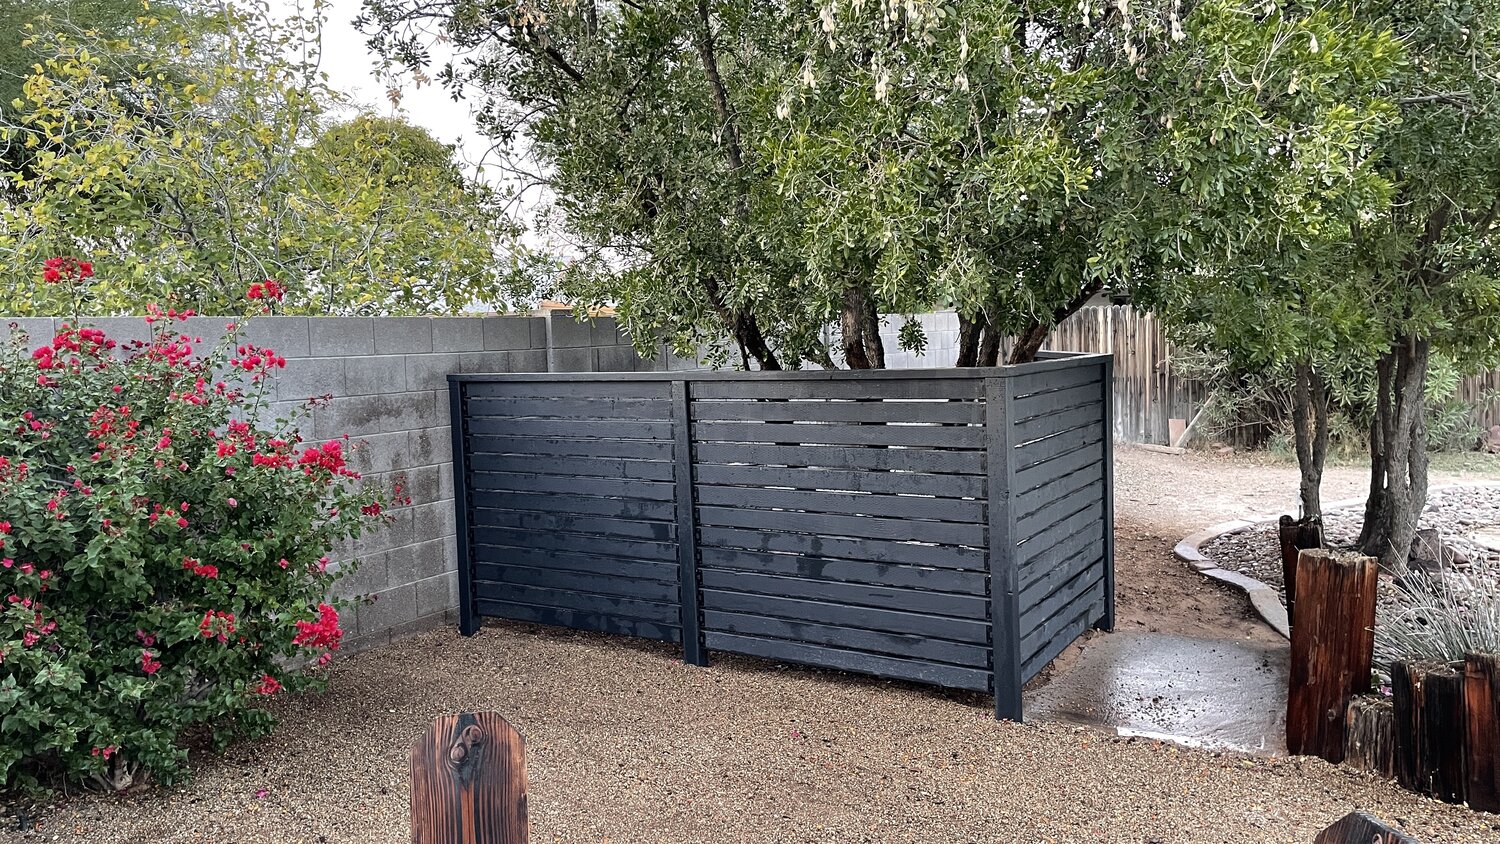 Spruce Up Your Yard with a Horizontal Fence